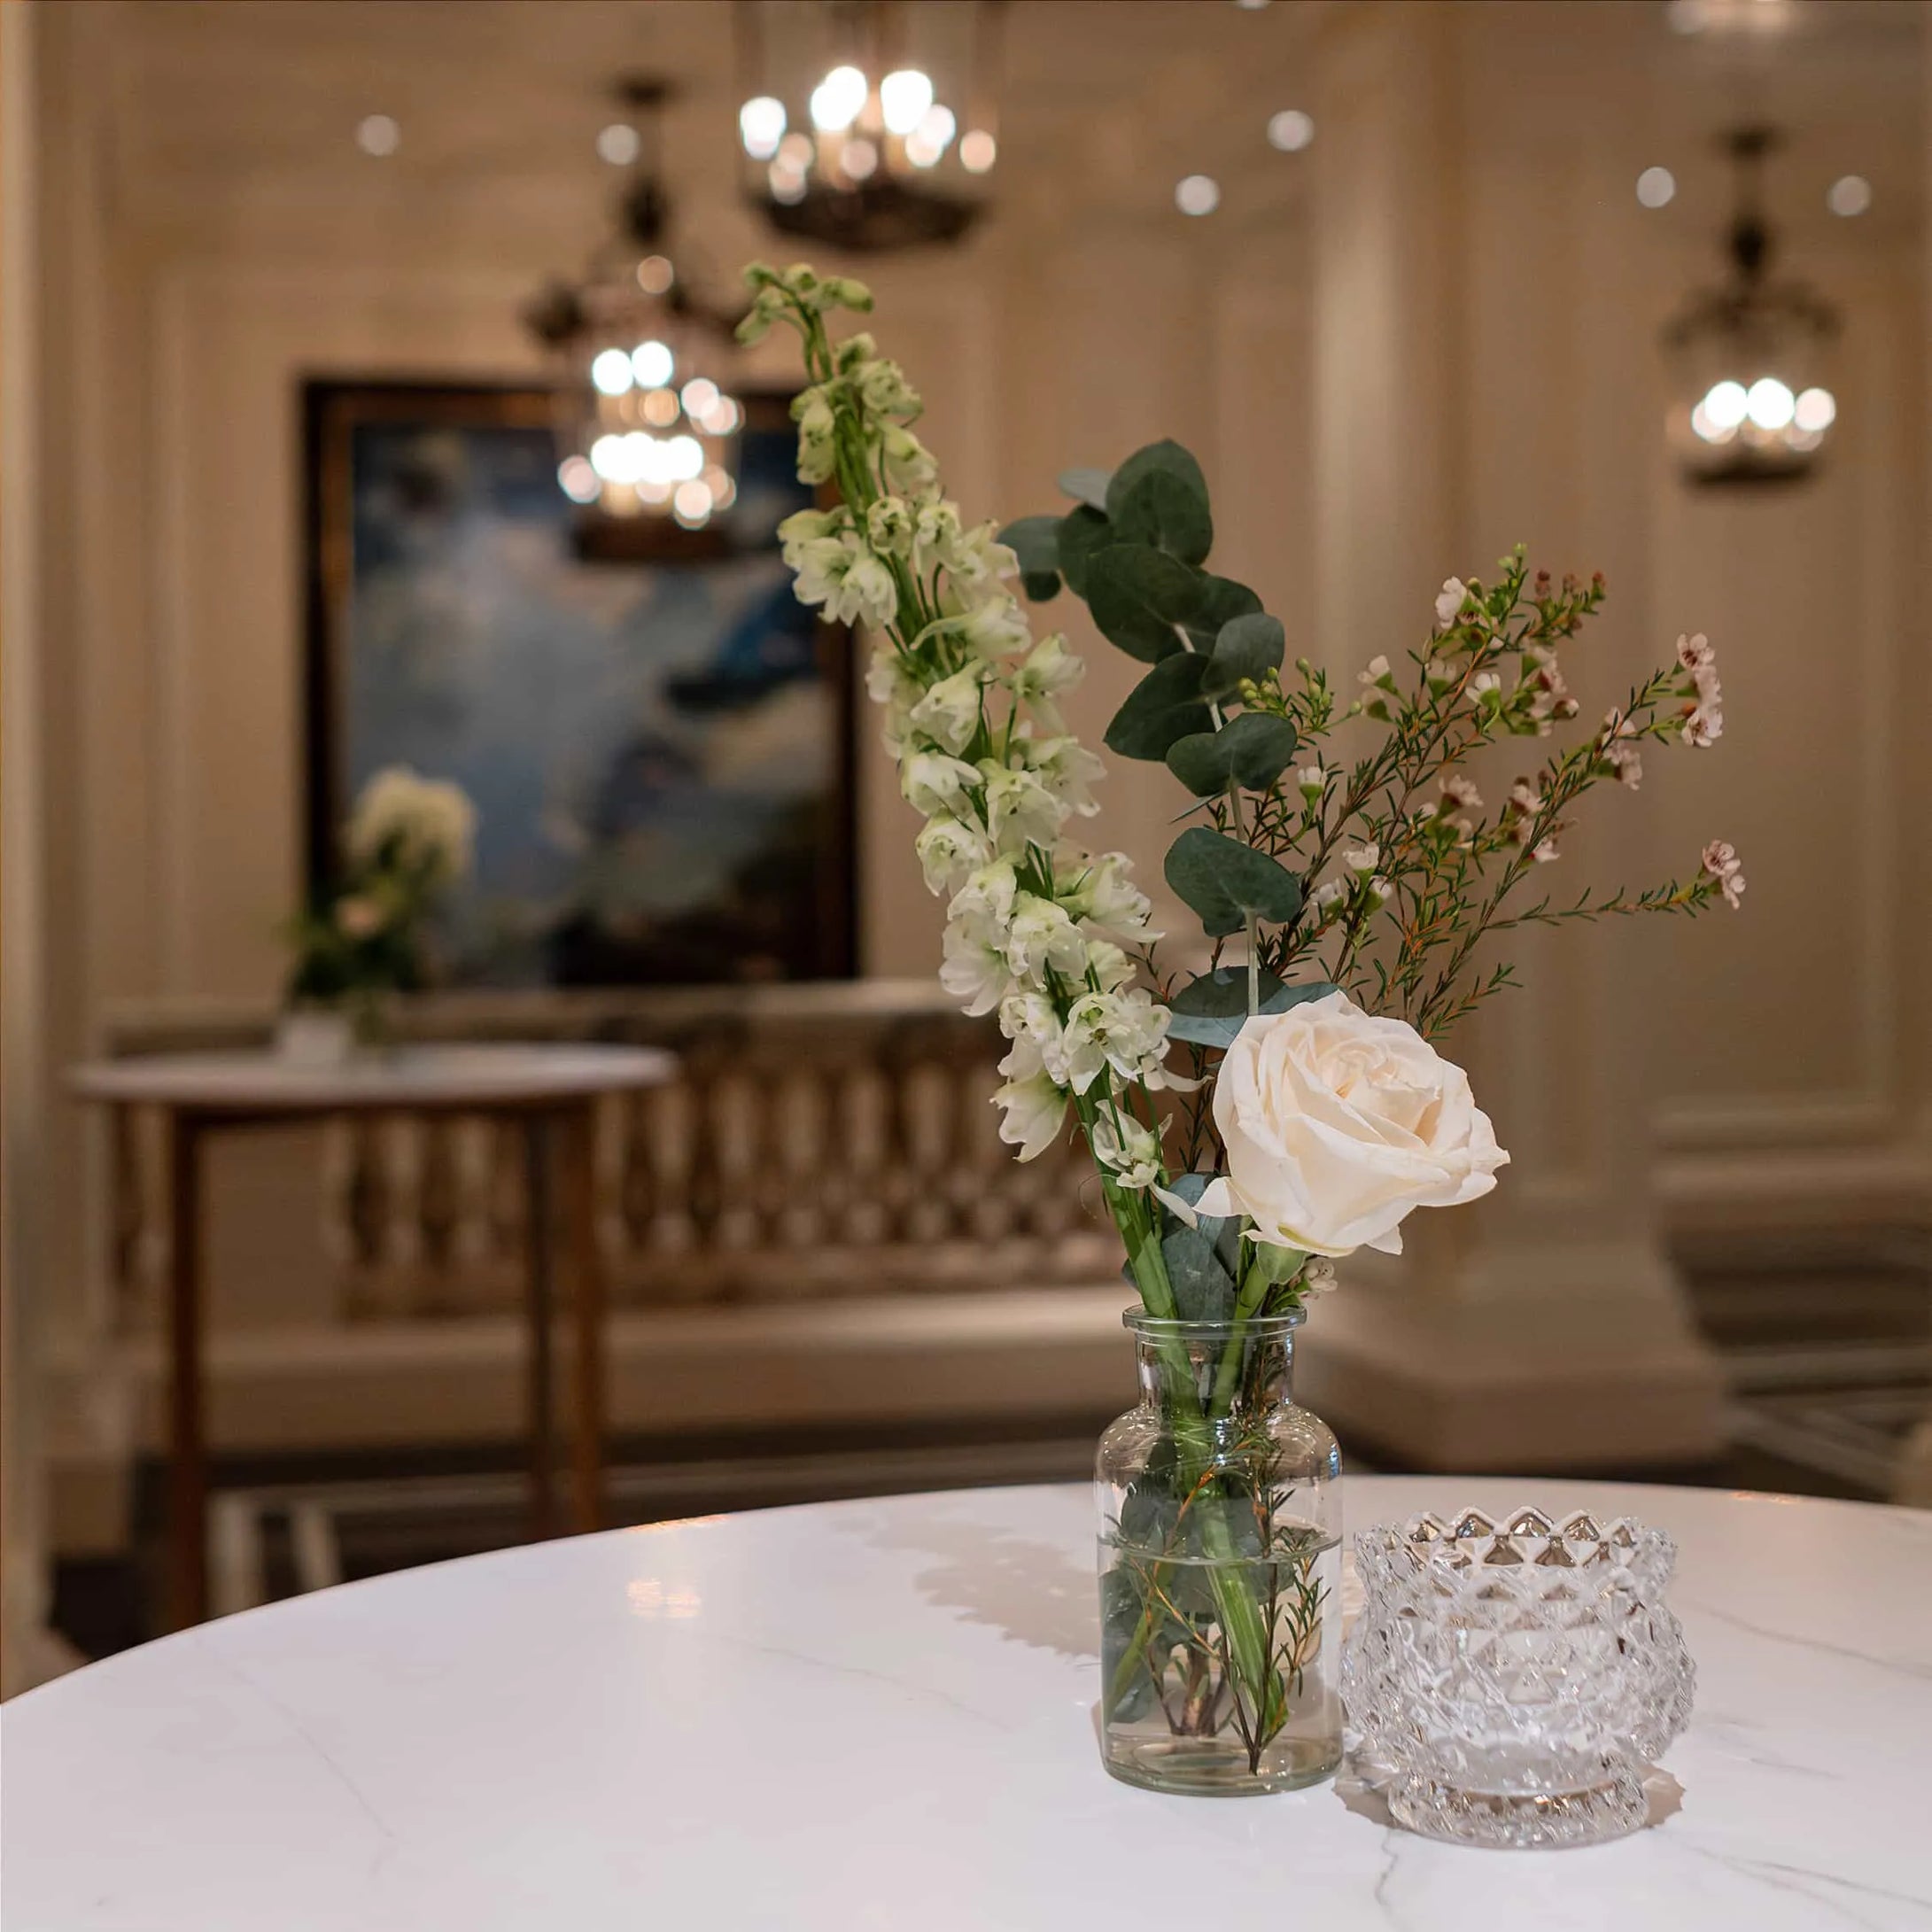 A simple yet elegant floral display by Amaranté London - Event Florist in London. In his image, a single pristine rose and delicate greenery in a clear vase